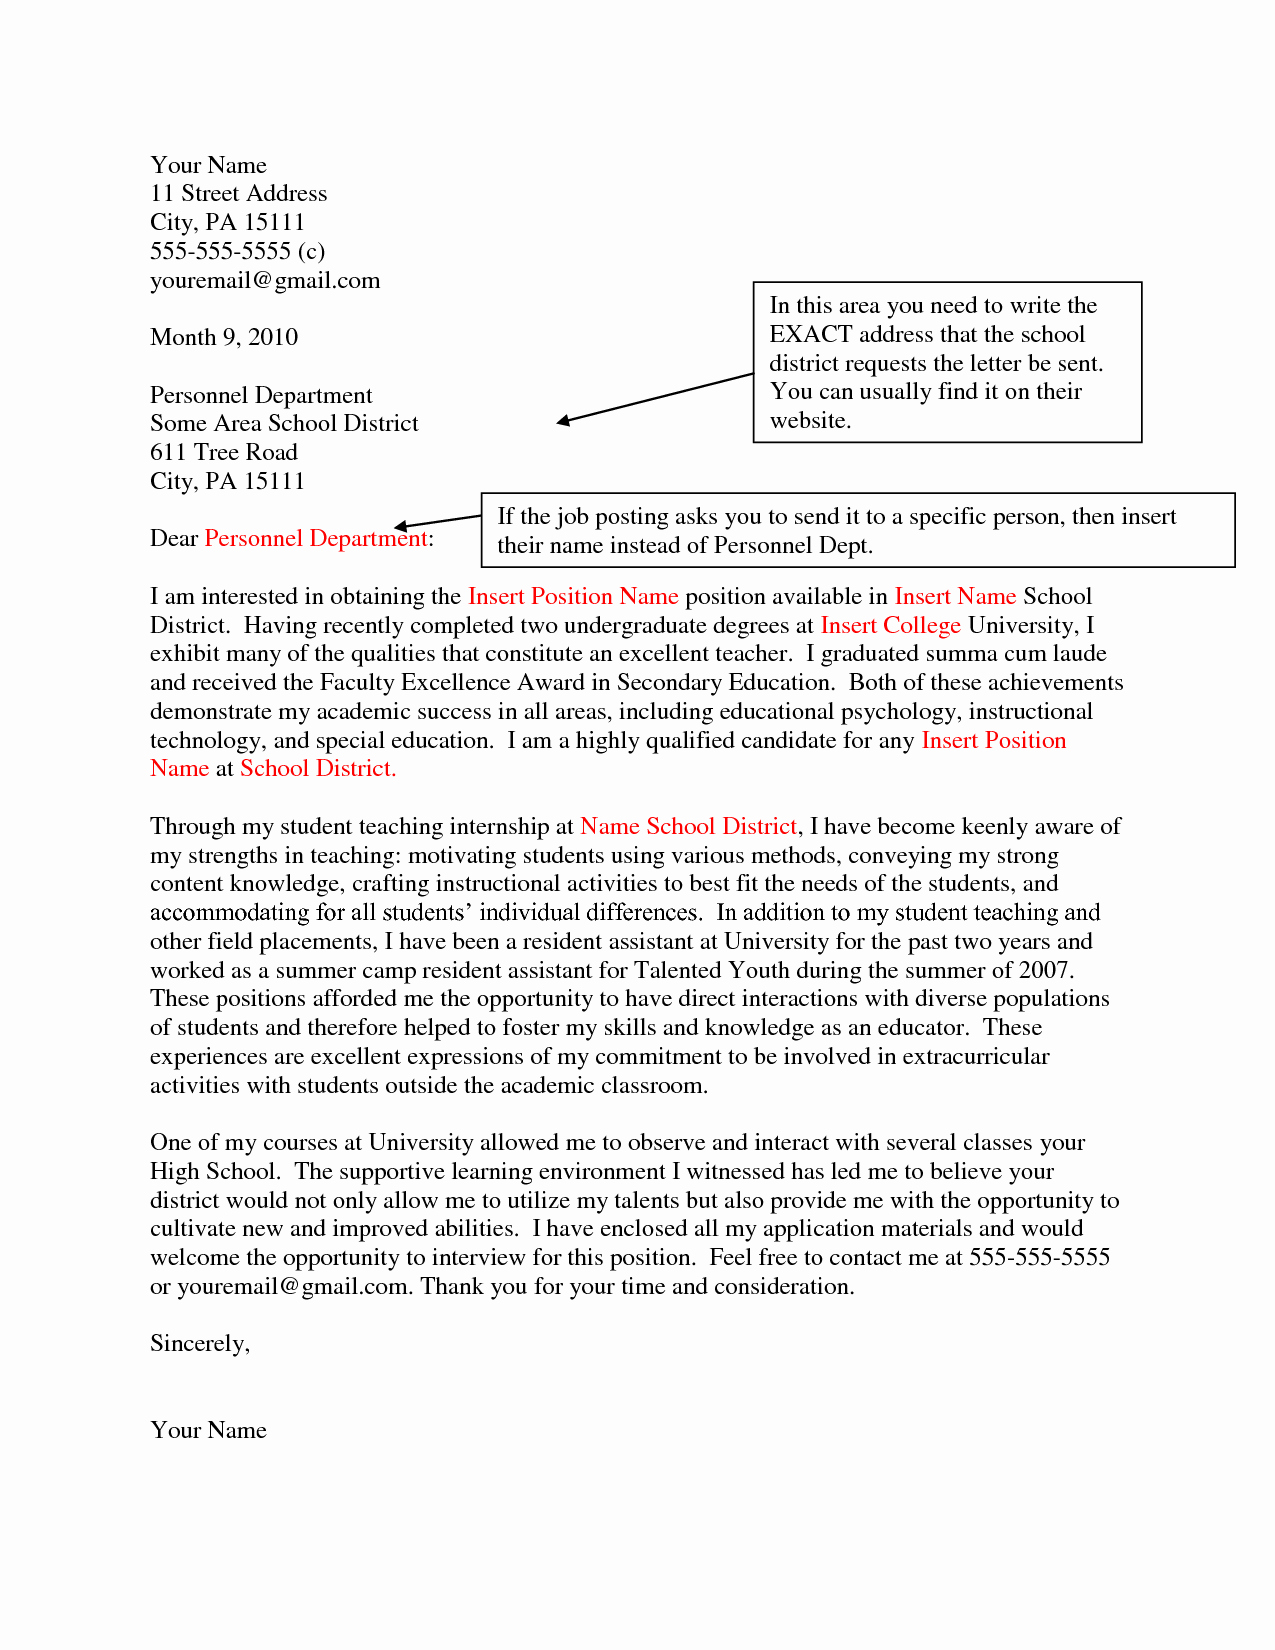 Example Of Letter Of Interest Lovely How to Write A Cover Letter Of Interest Example for A Job